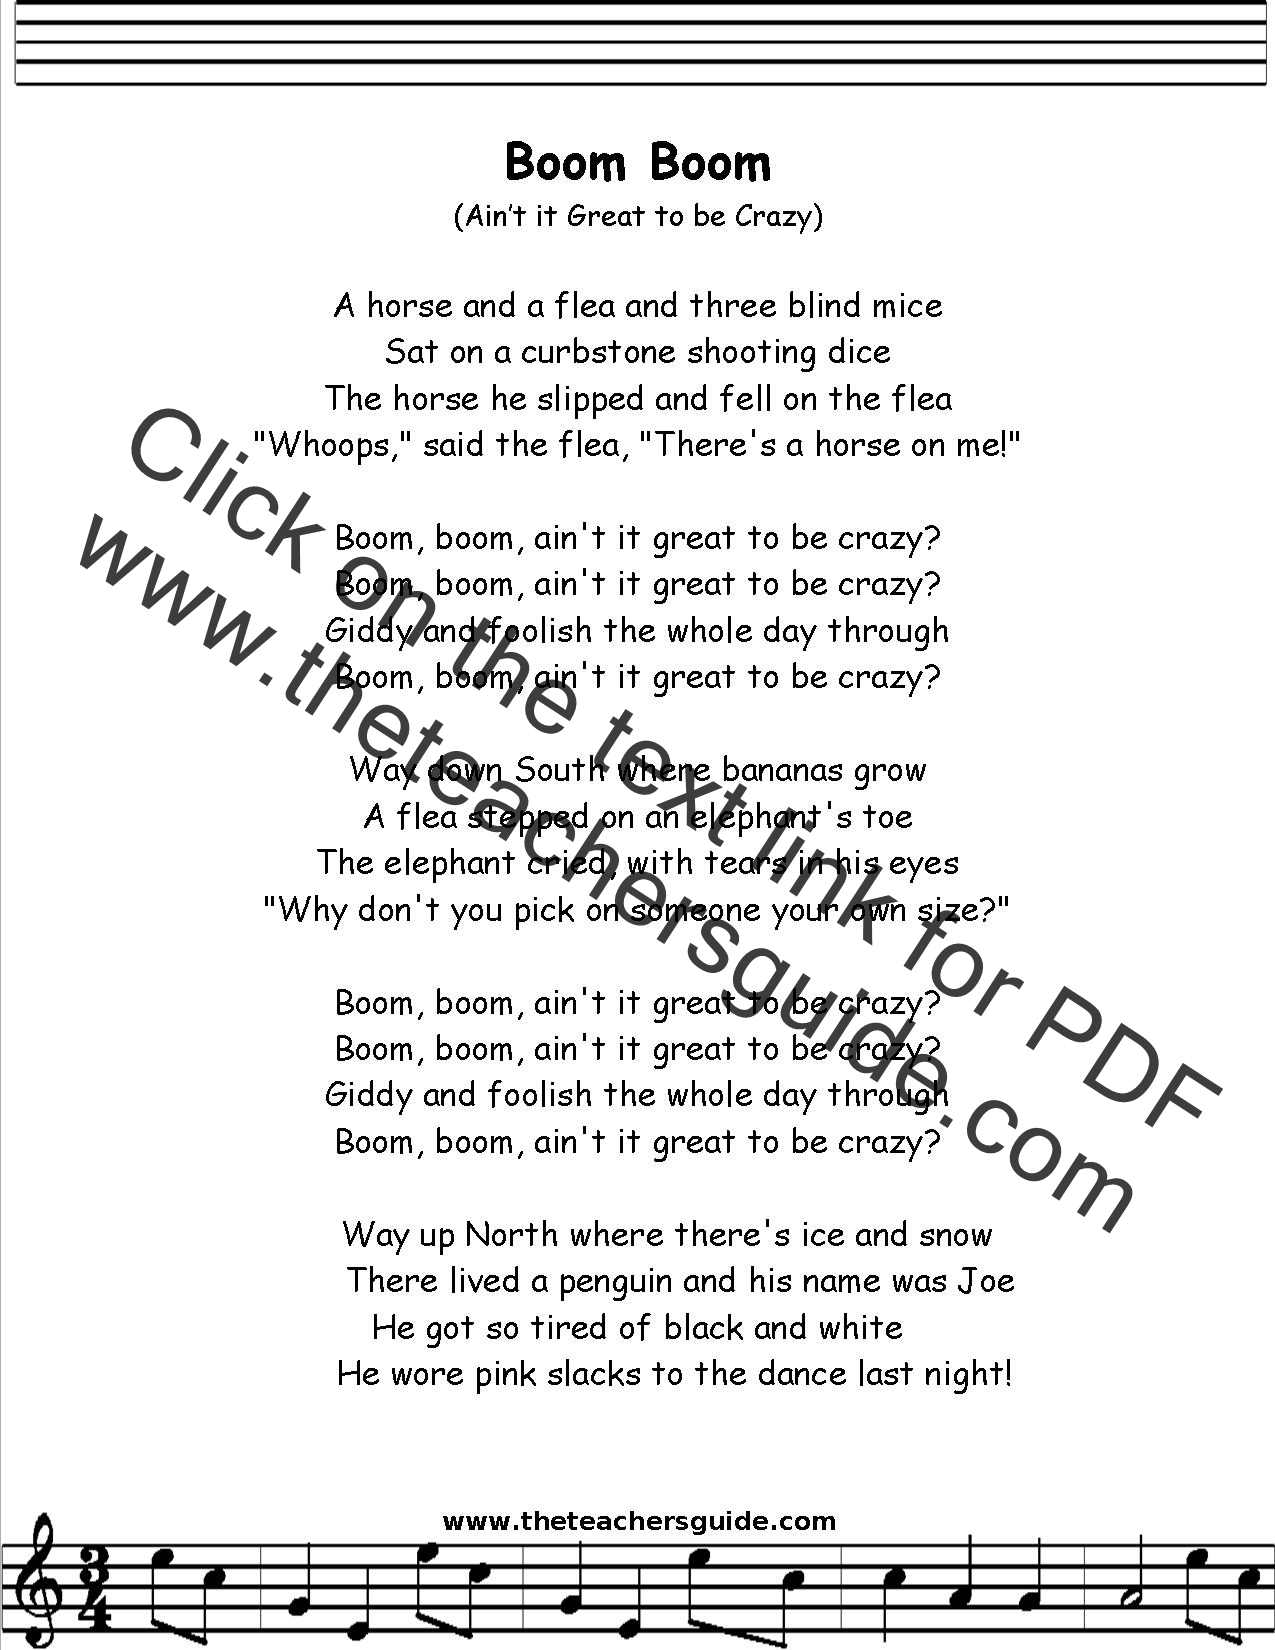 Boom Boom Ain't It Great to be Crazy Lyrics, Printout, MIDI, and Video